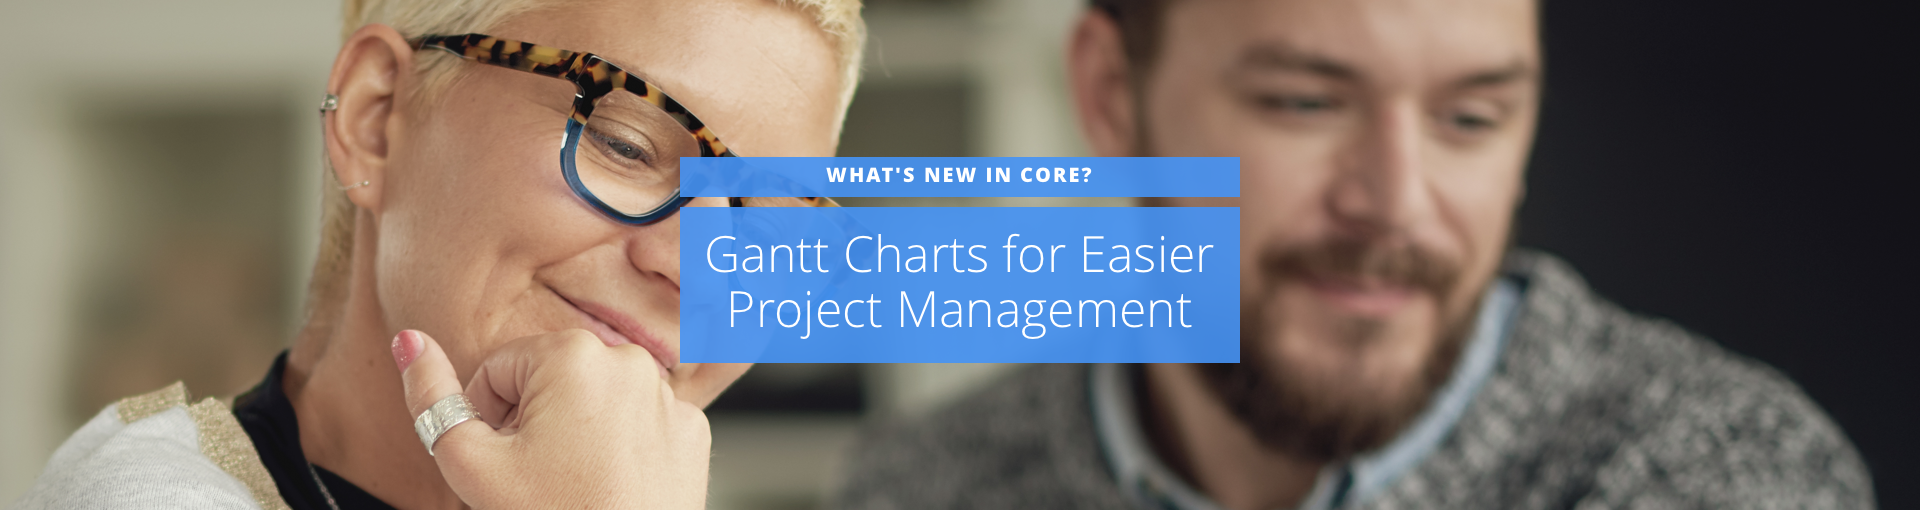 What’s New in Core? Gantt Charts for Easier Project Management Featured Image